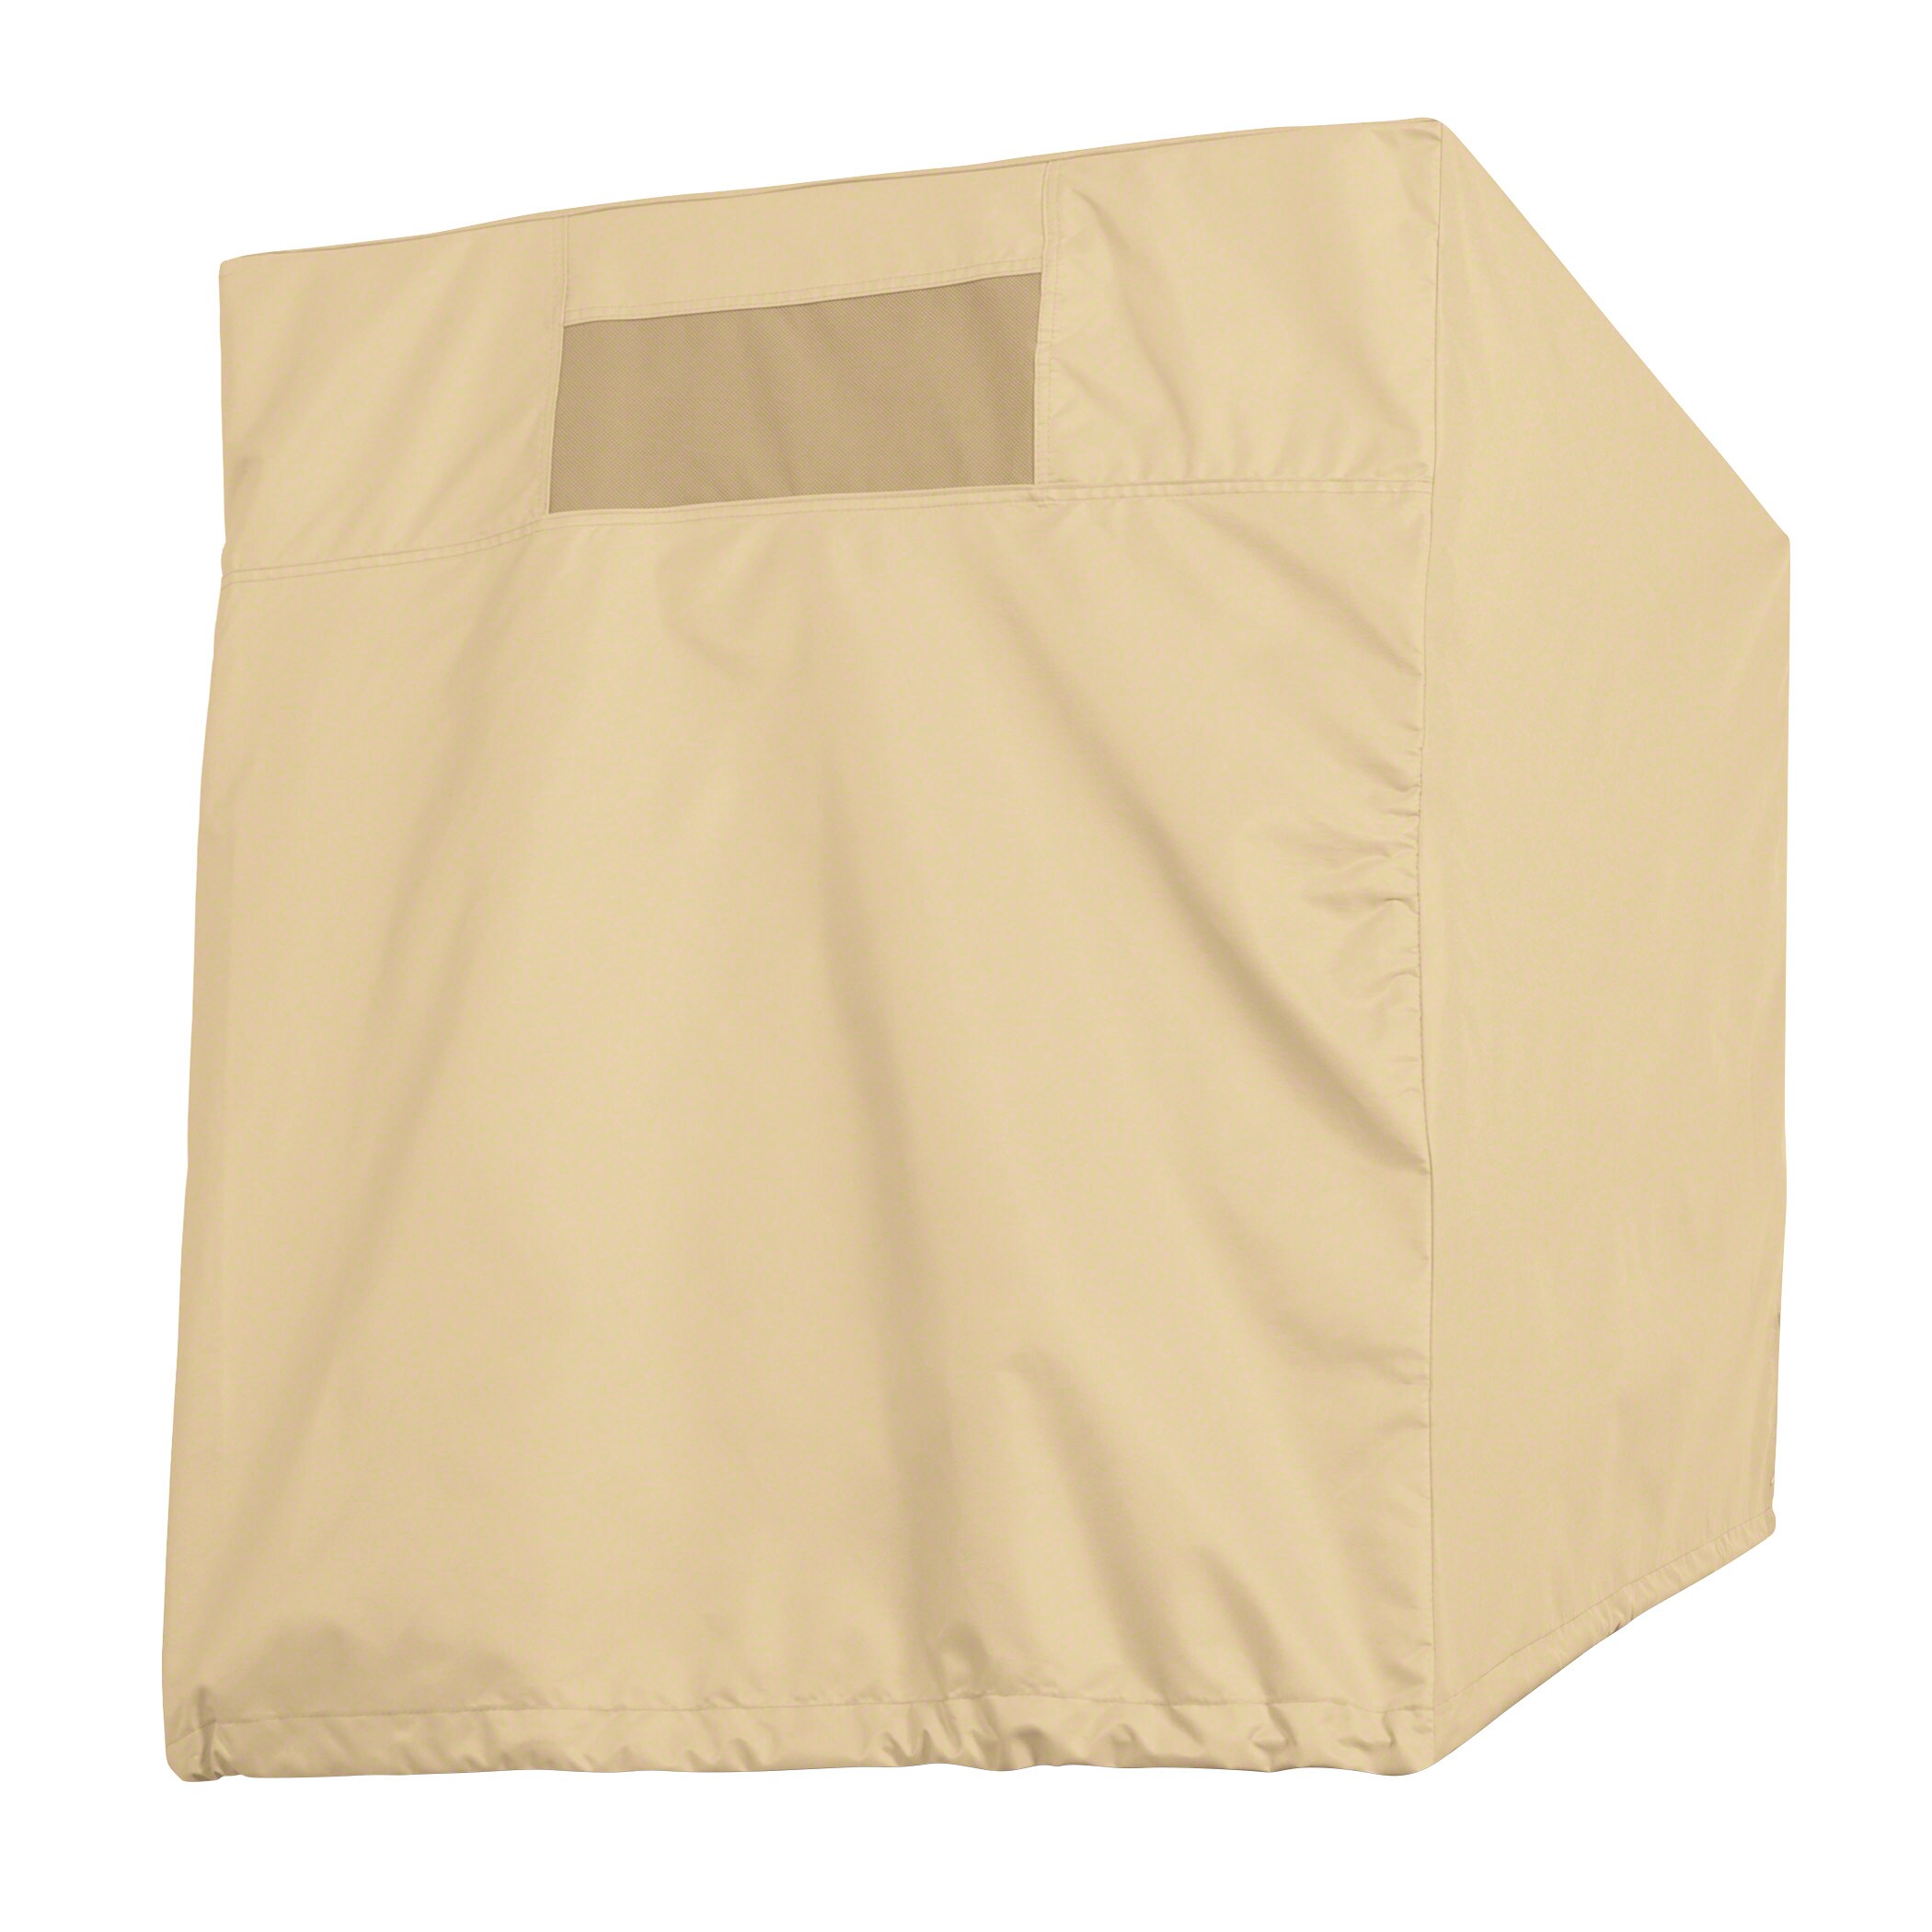 WeatherGuard Inc. Dial Manufacturing Evaporative Cooler Cover Down Draft